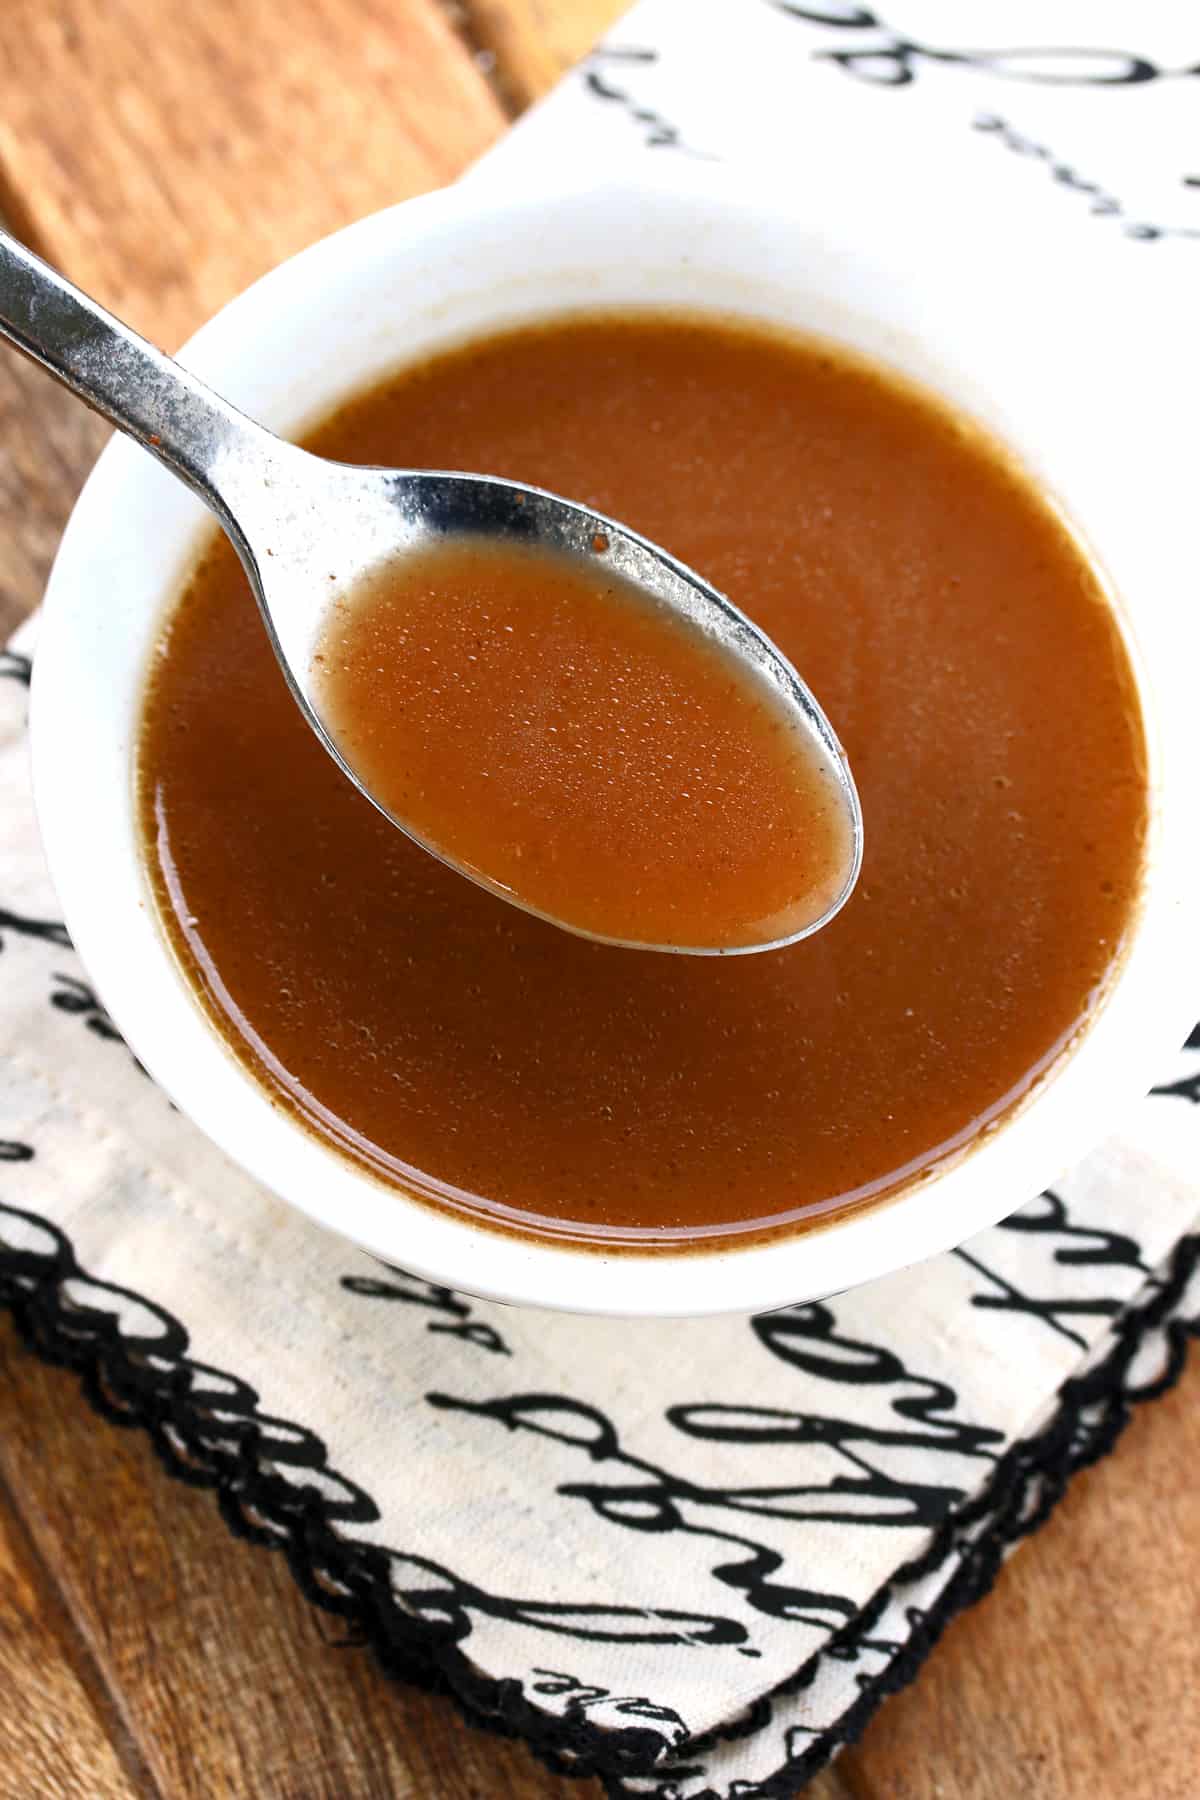 au jus recipe best homemade French dip gravy without drippings easy